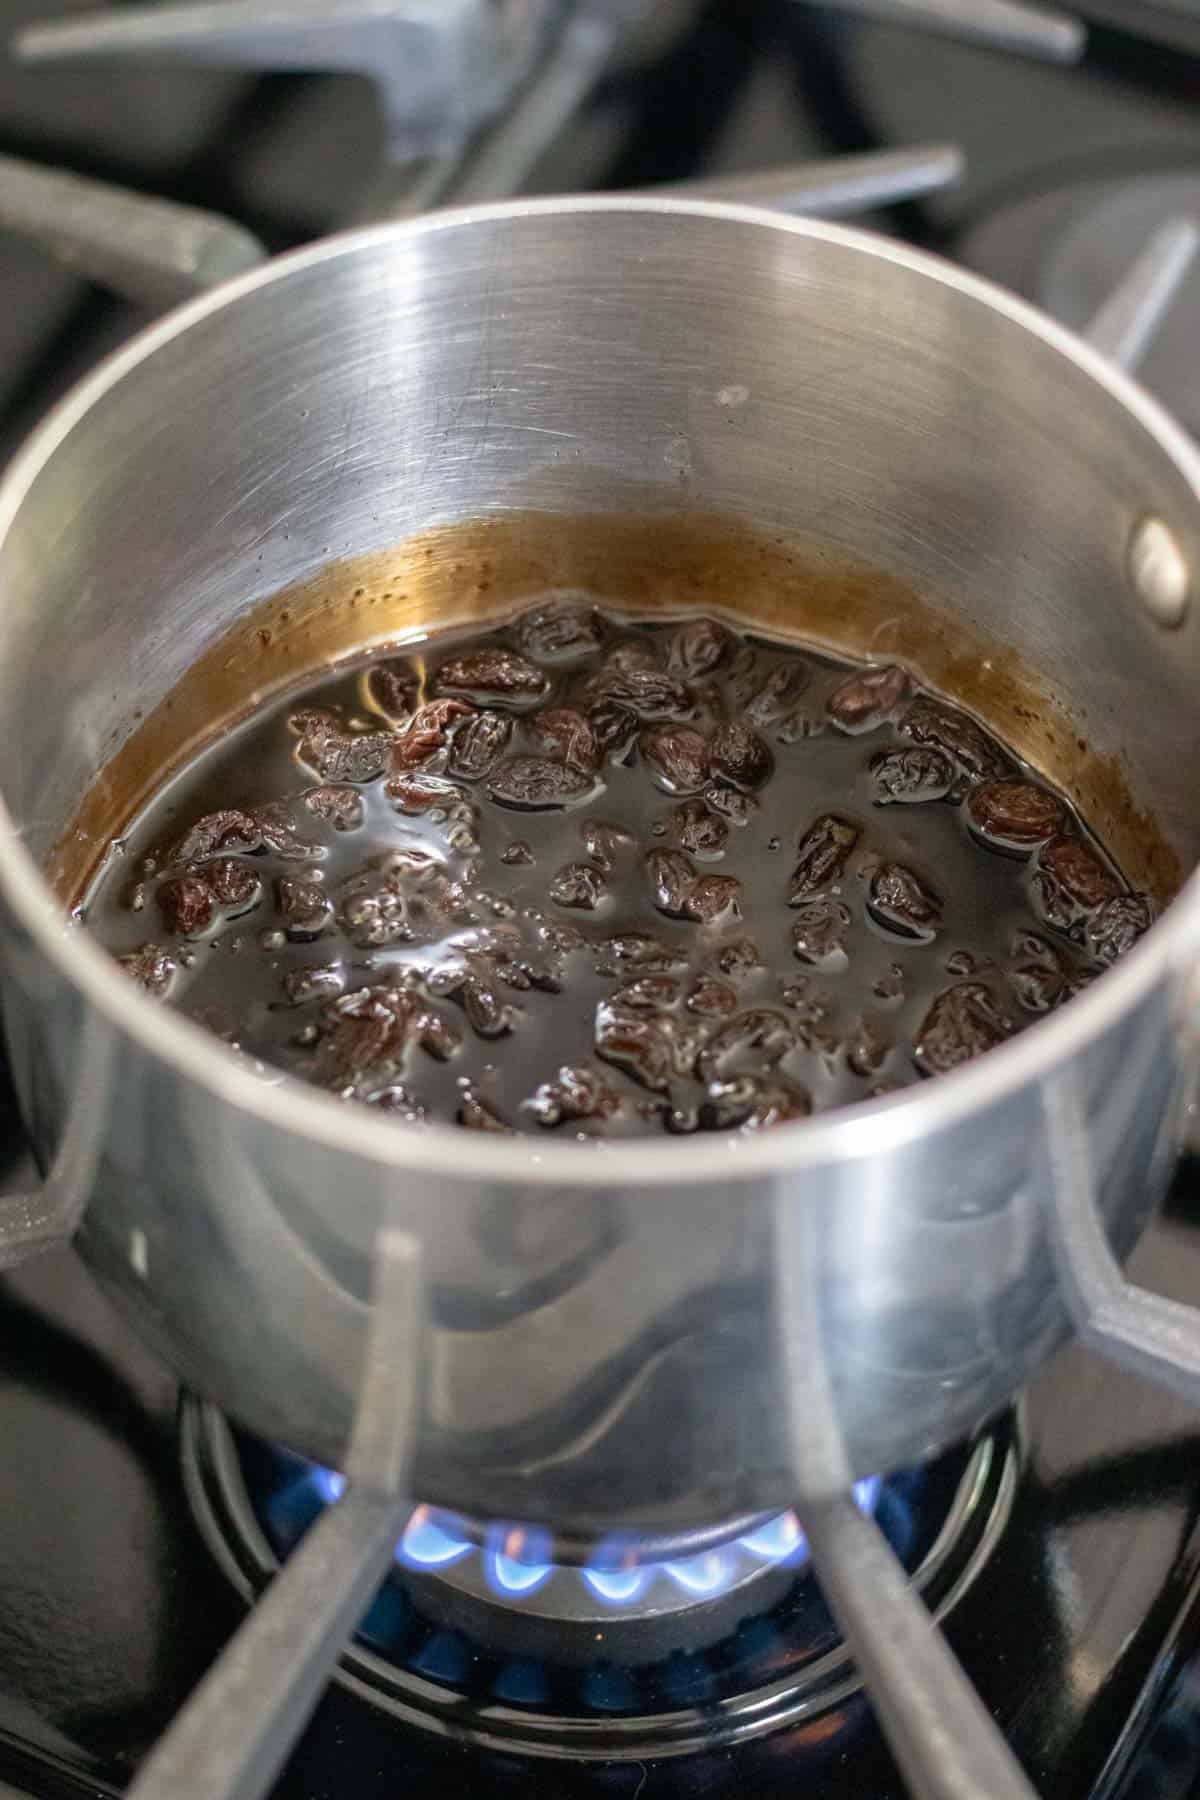 raisins and balsamic vinegar reducing in a sauce pan on the stove.